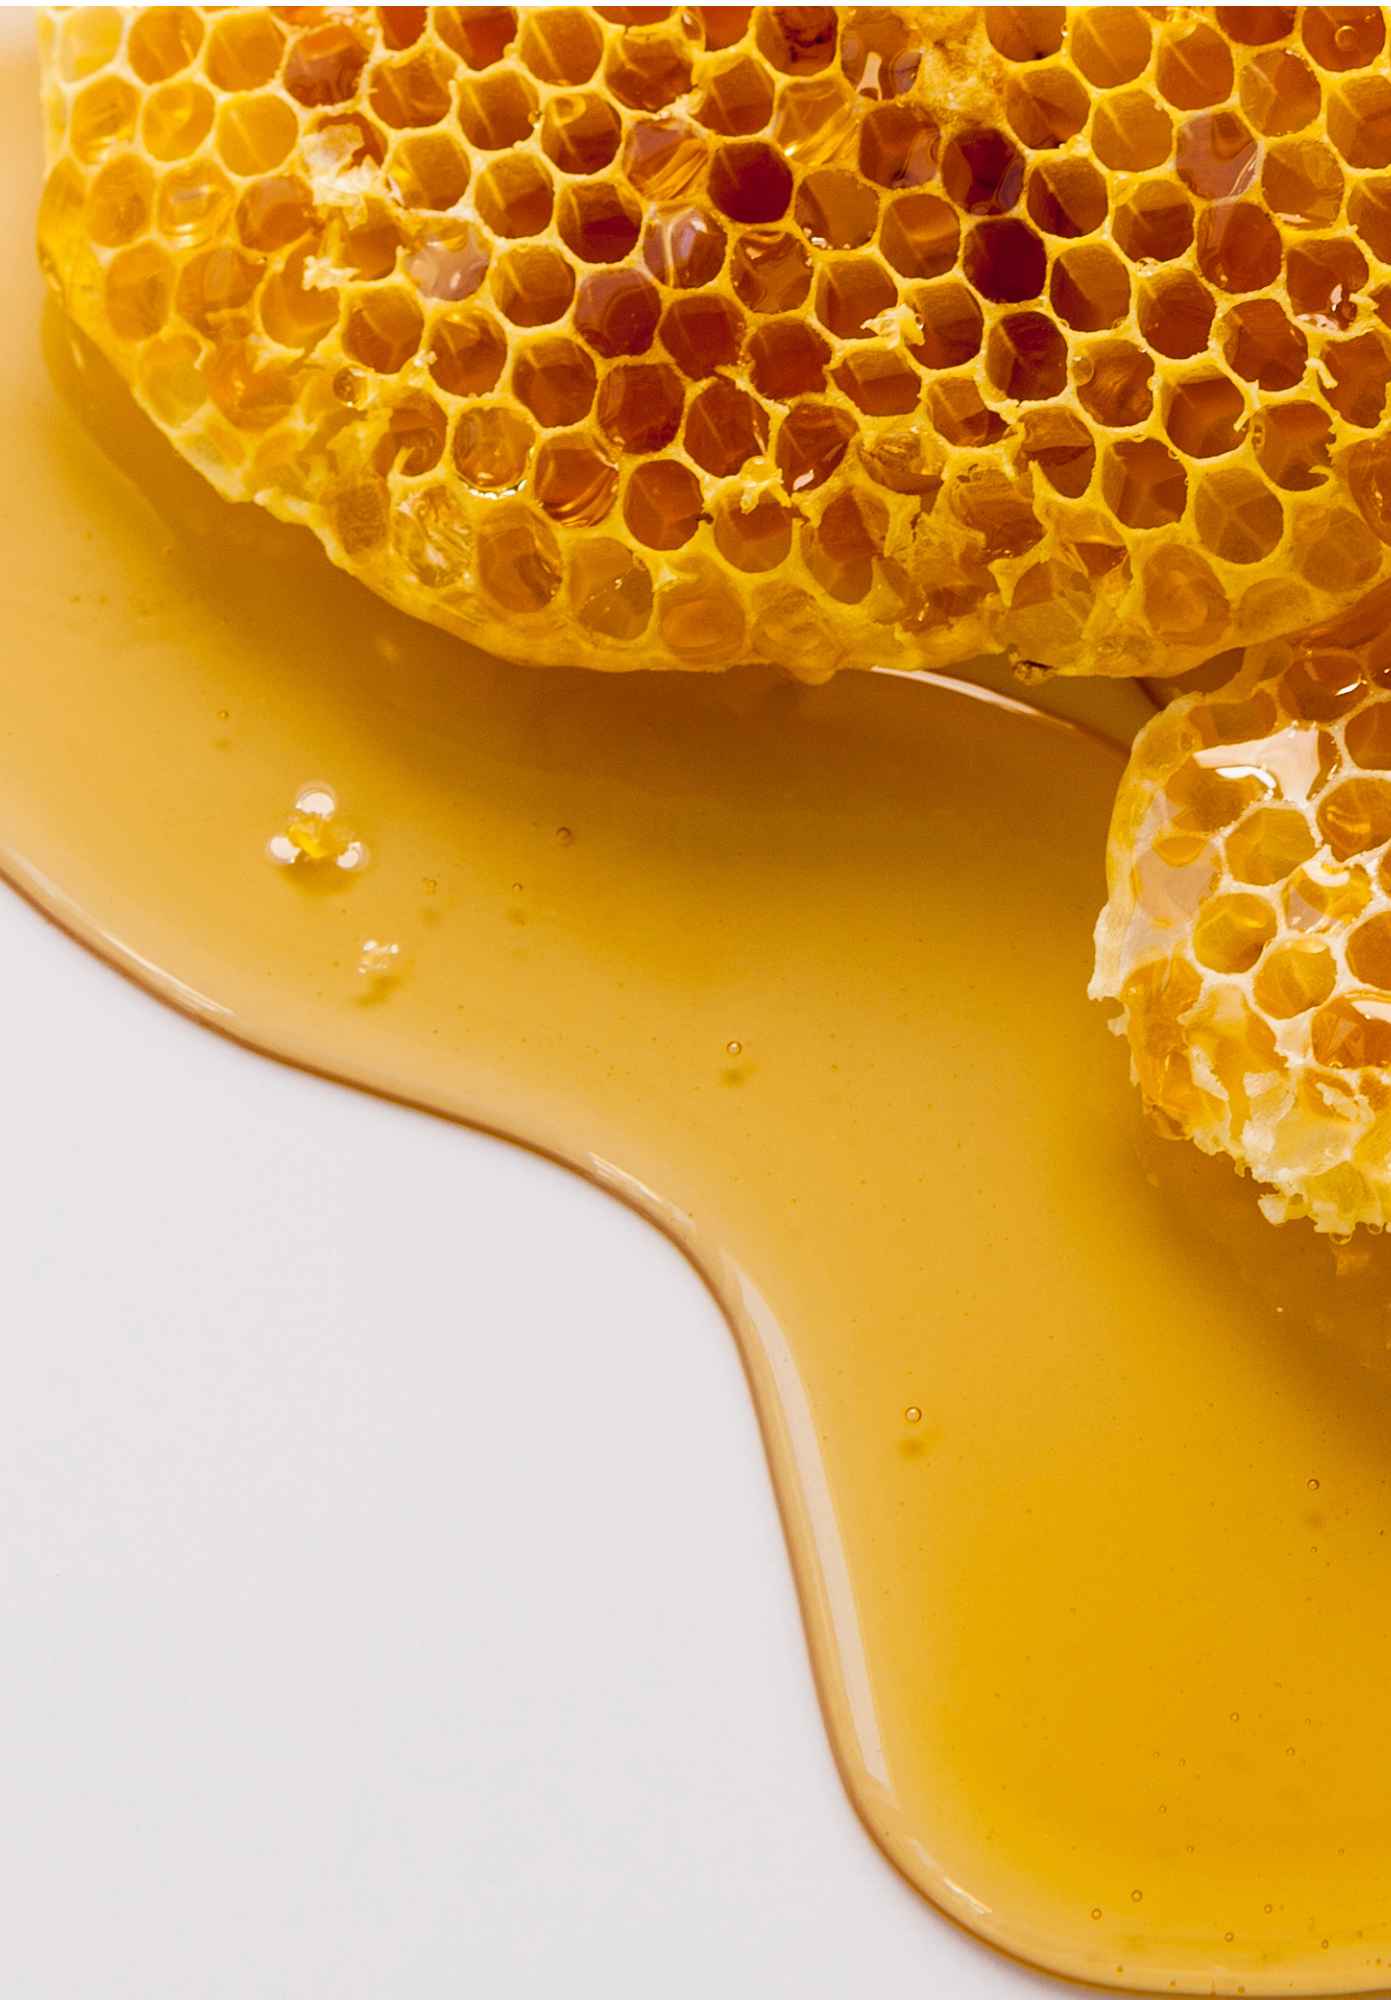 From Hive to Health: How Pure Honey Can Help You Thrive in Winter